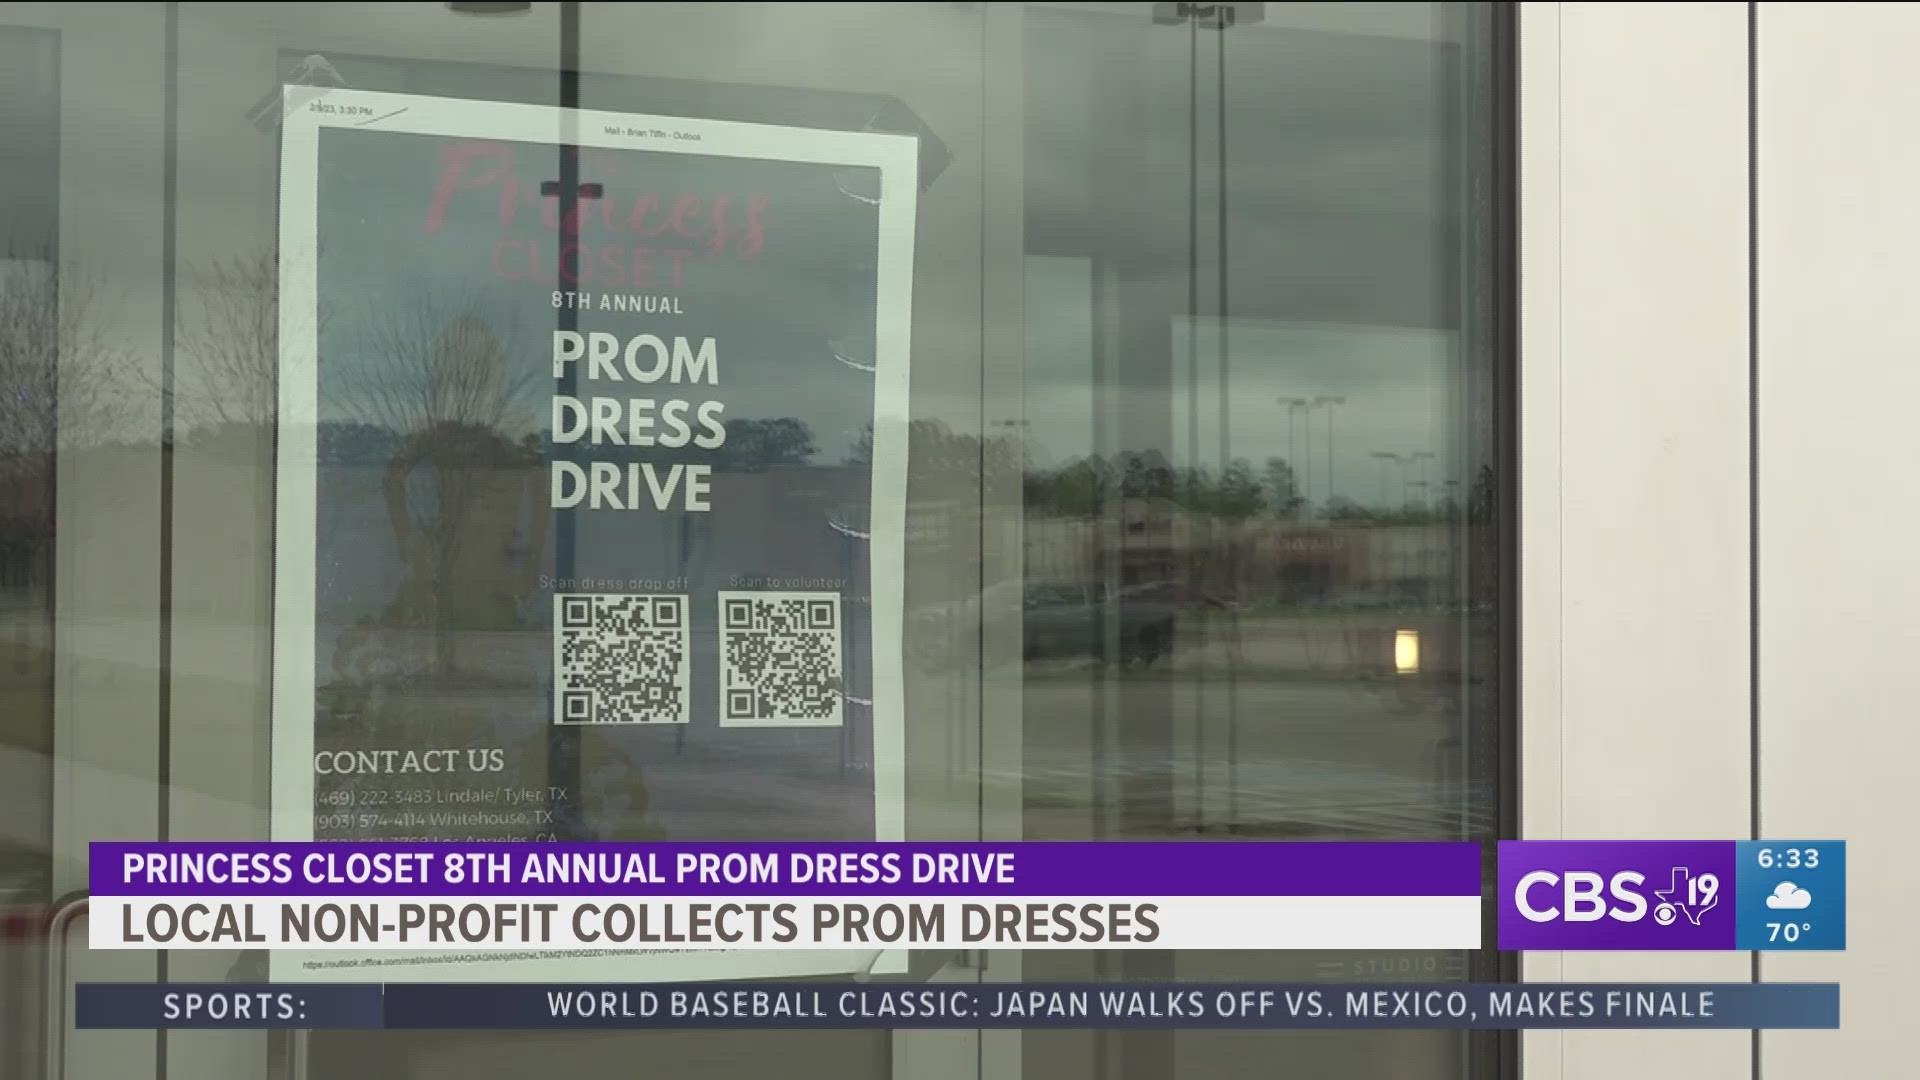 The Princess closet has partnered with Studio Movie Grill for 8th annual prom dress drive. This month they've received more than 70 dresses donated from East Texans.